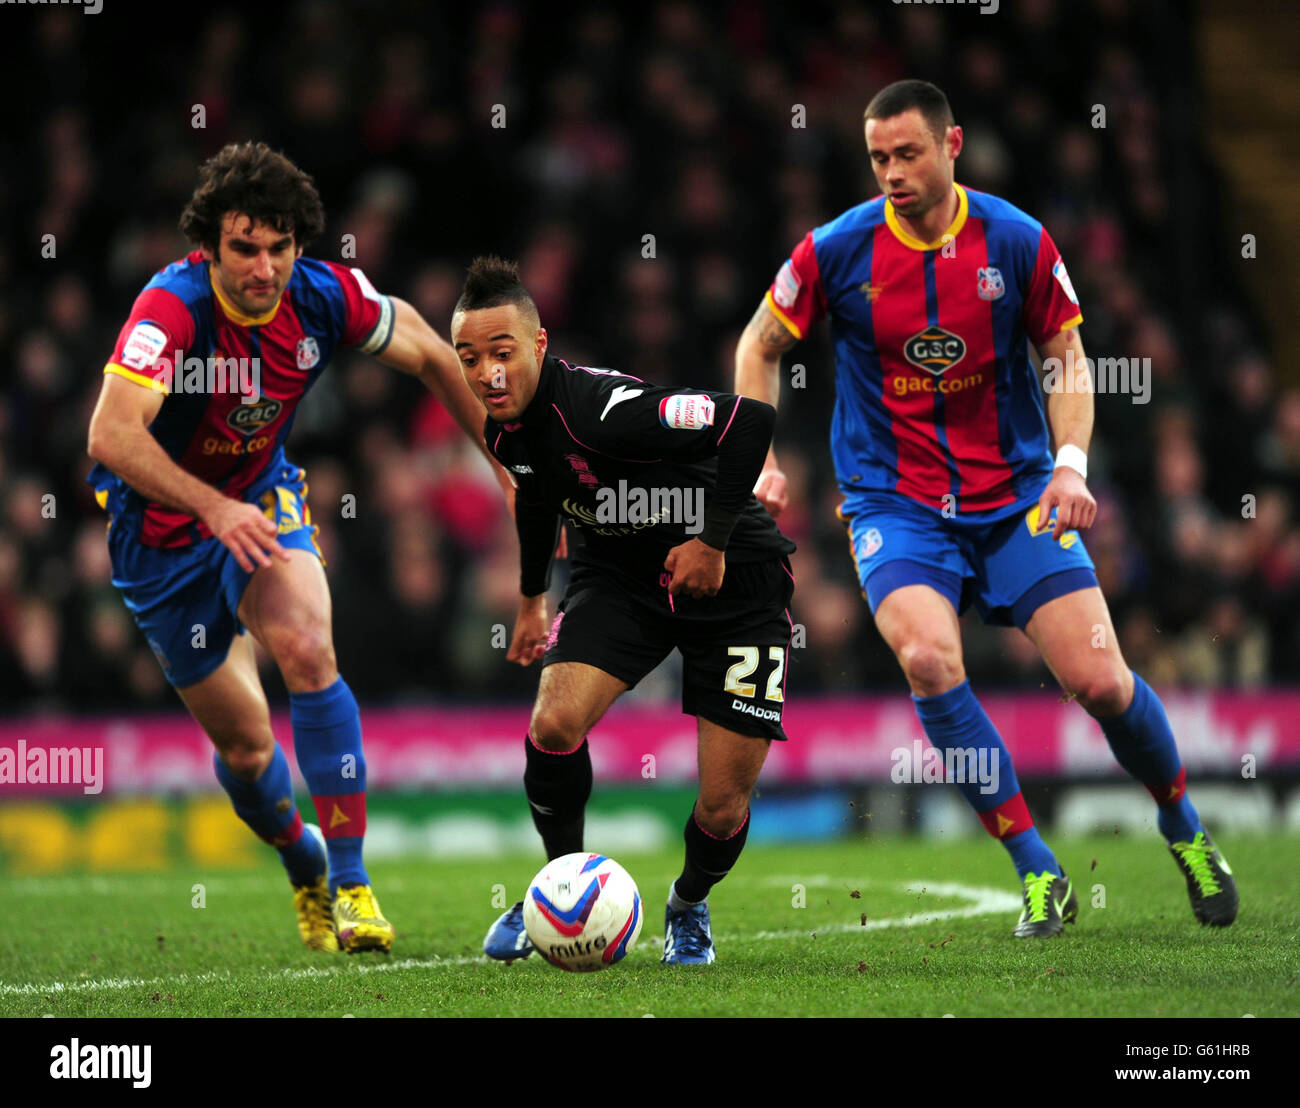 Soccer - npower Football League Championship - Crystal Palace Play Off  Feature 2012/13 - Crystal Palace Training Ground. Crystal Palace's Yannick  Bolasie, Damien Delaney and Mile Jedinak Stock Photo - Alamy